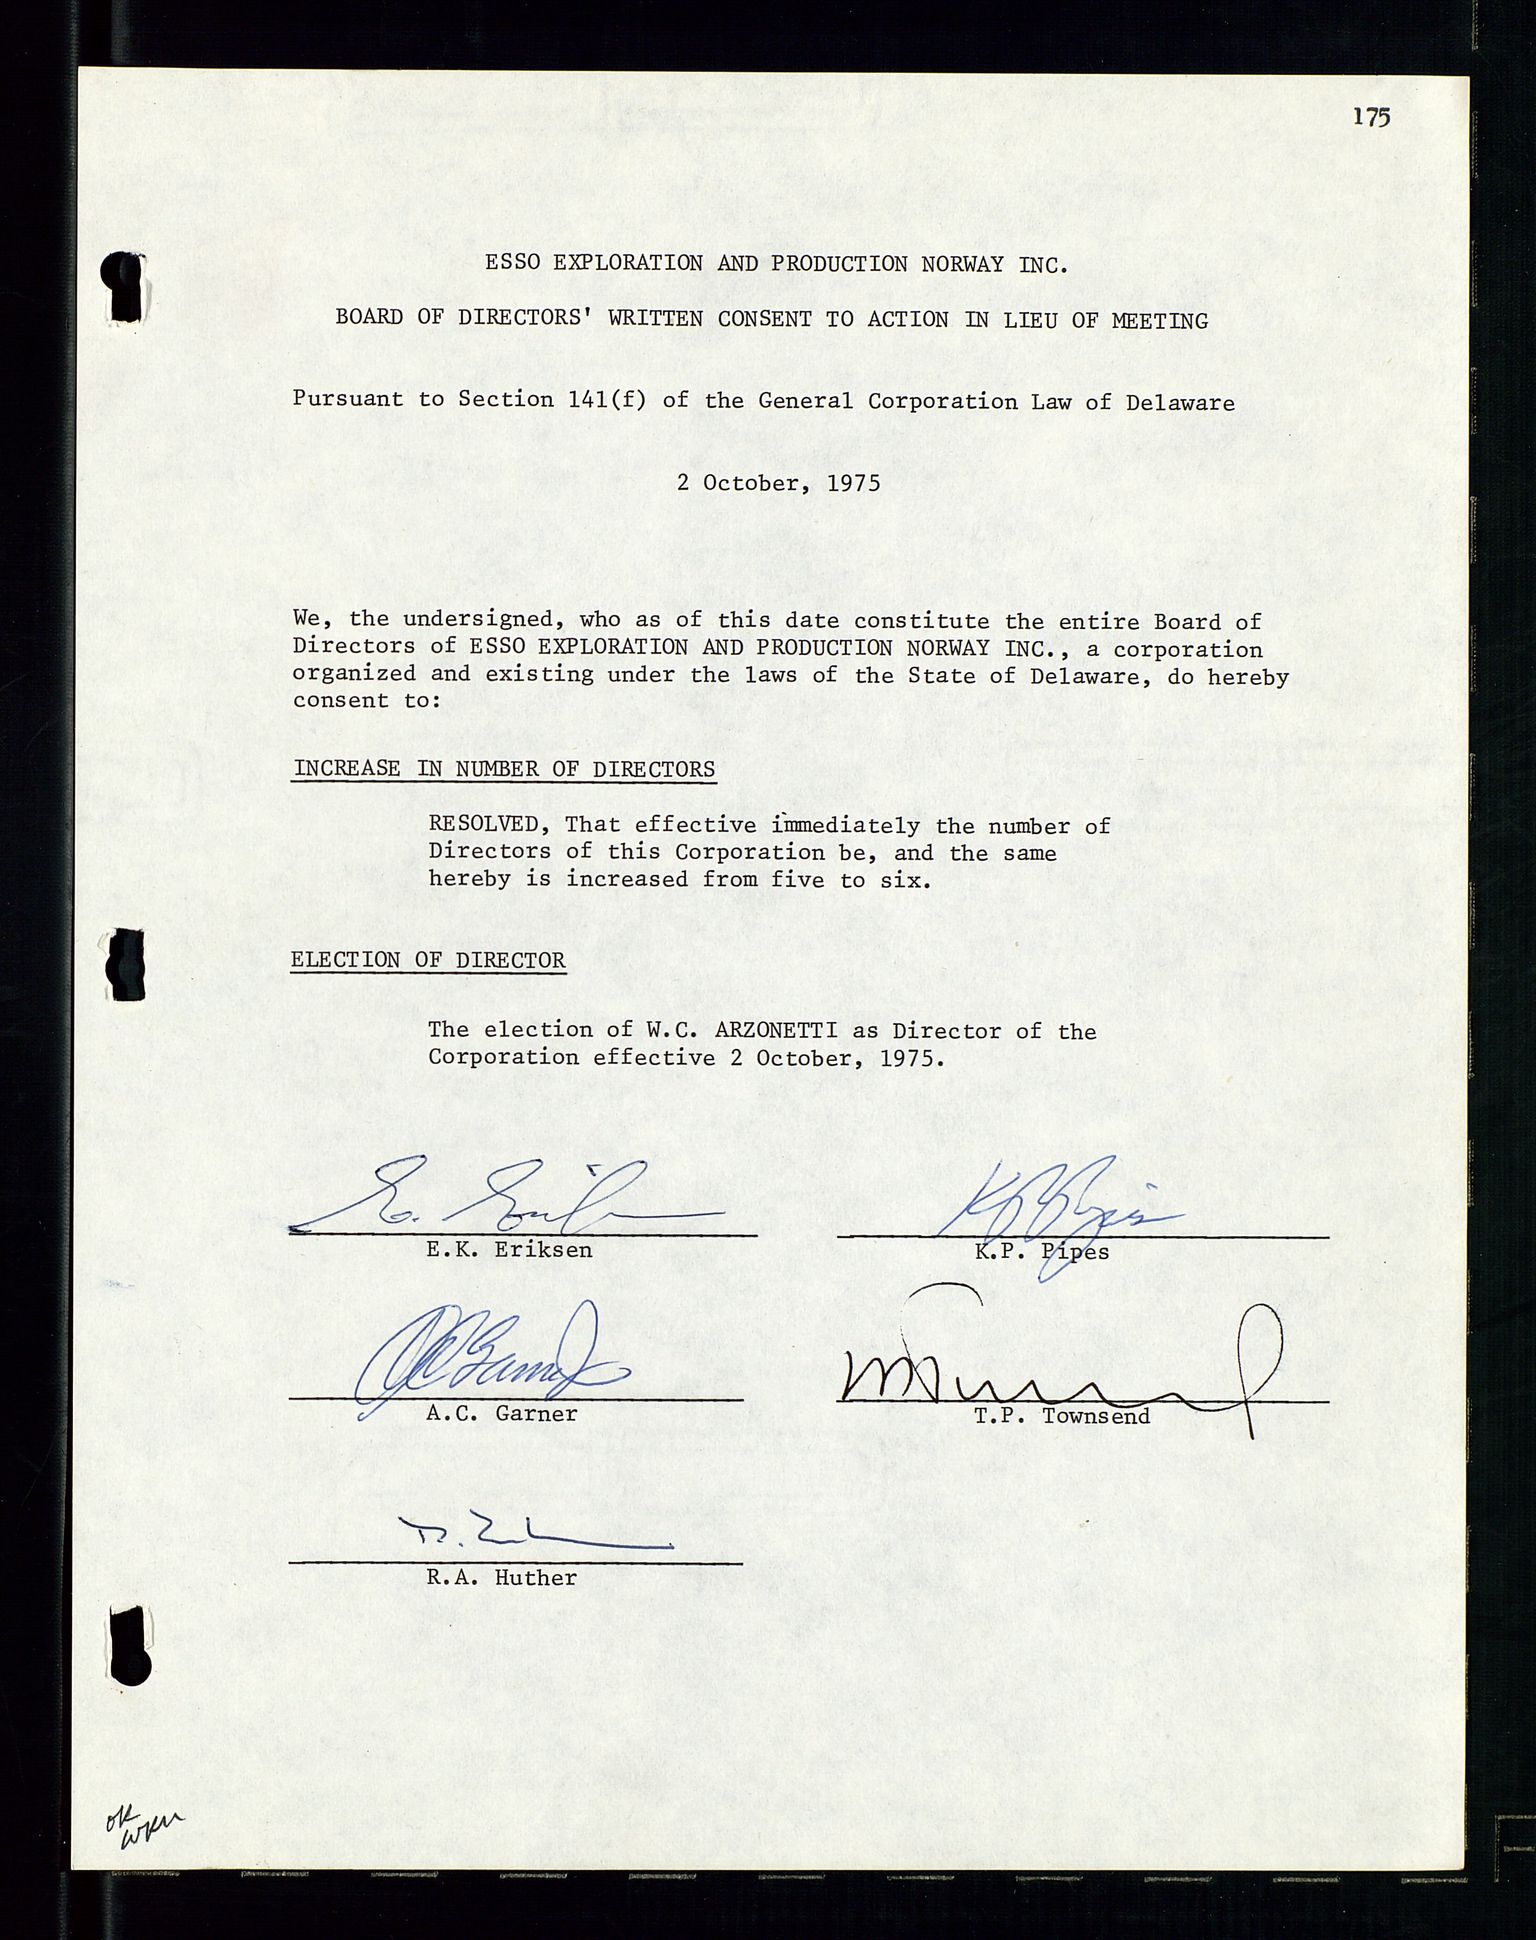 Pa 1512 - Esso Exploration and Production Norway Inc., SAST/A-101917/A/Aa/L0001/0002: Styredokumenter / Corporate records, Board meeting minutes, Agreements, Stocholder meetings, 1975-1979, p. 6